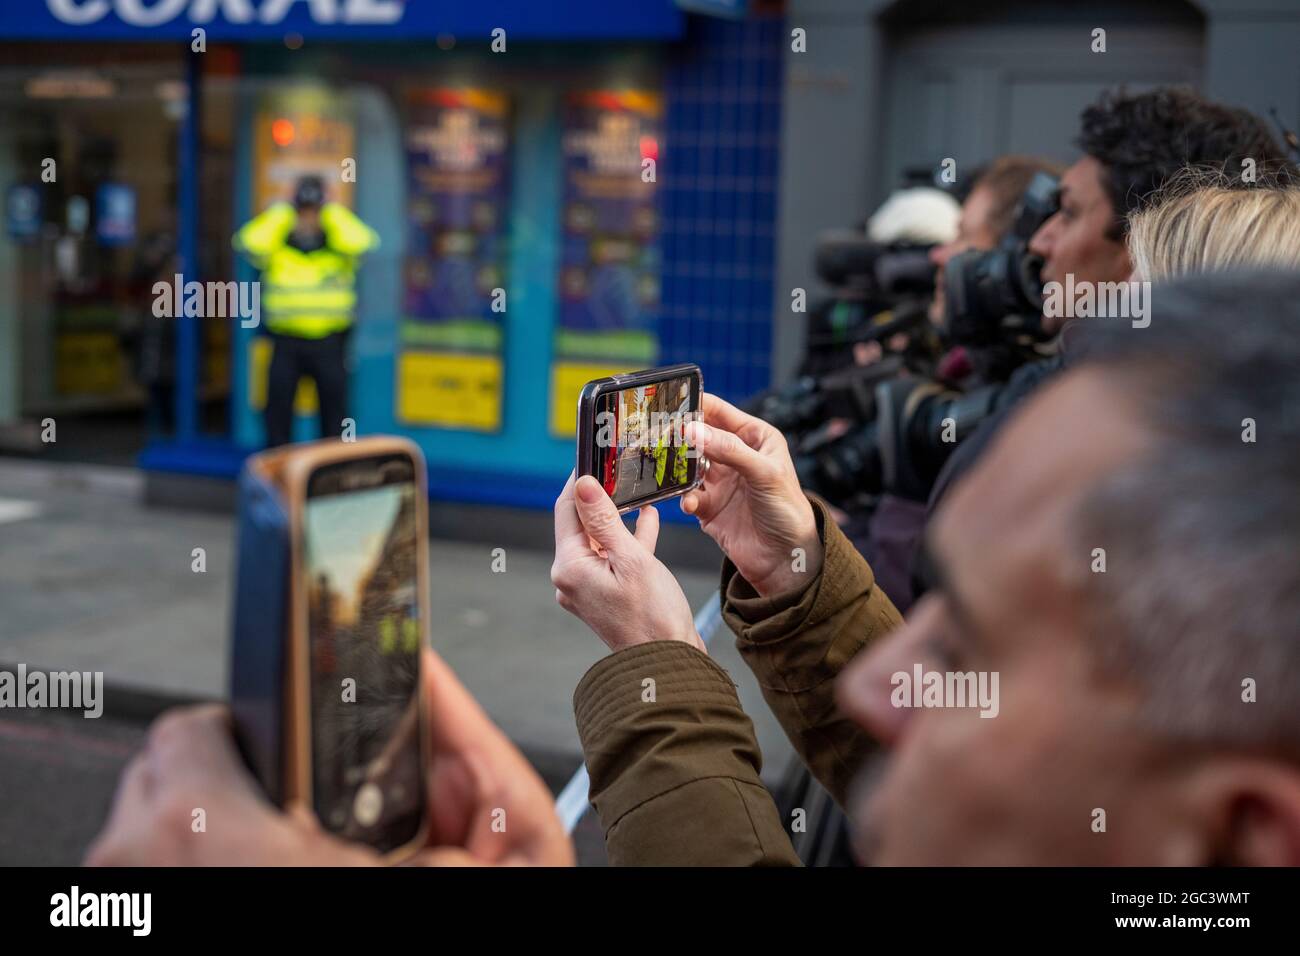 Bystanders and media recording  police responce activities during  London Bridge terror attack, on 29 of Novemebr 2019,London,England Stock Photo